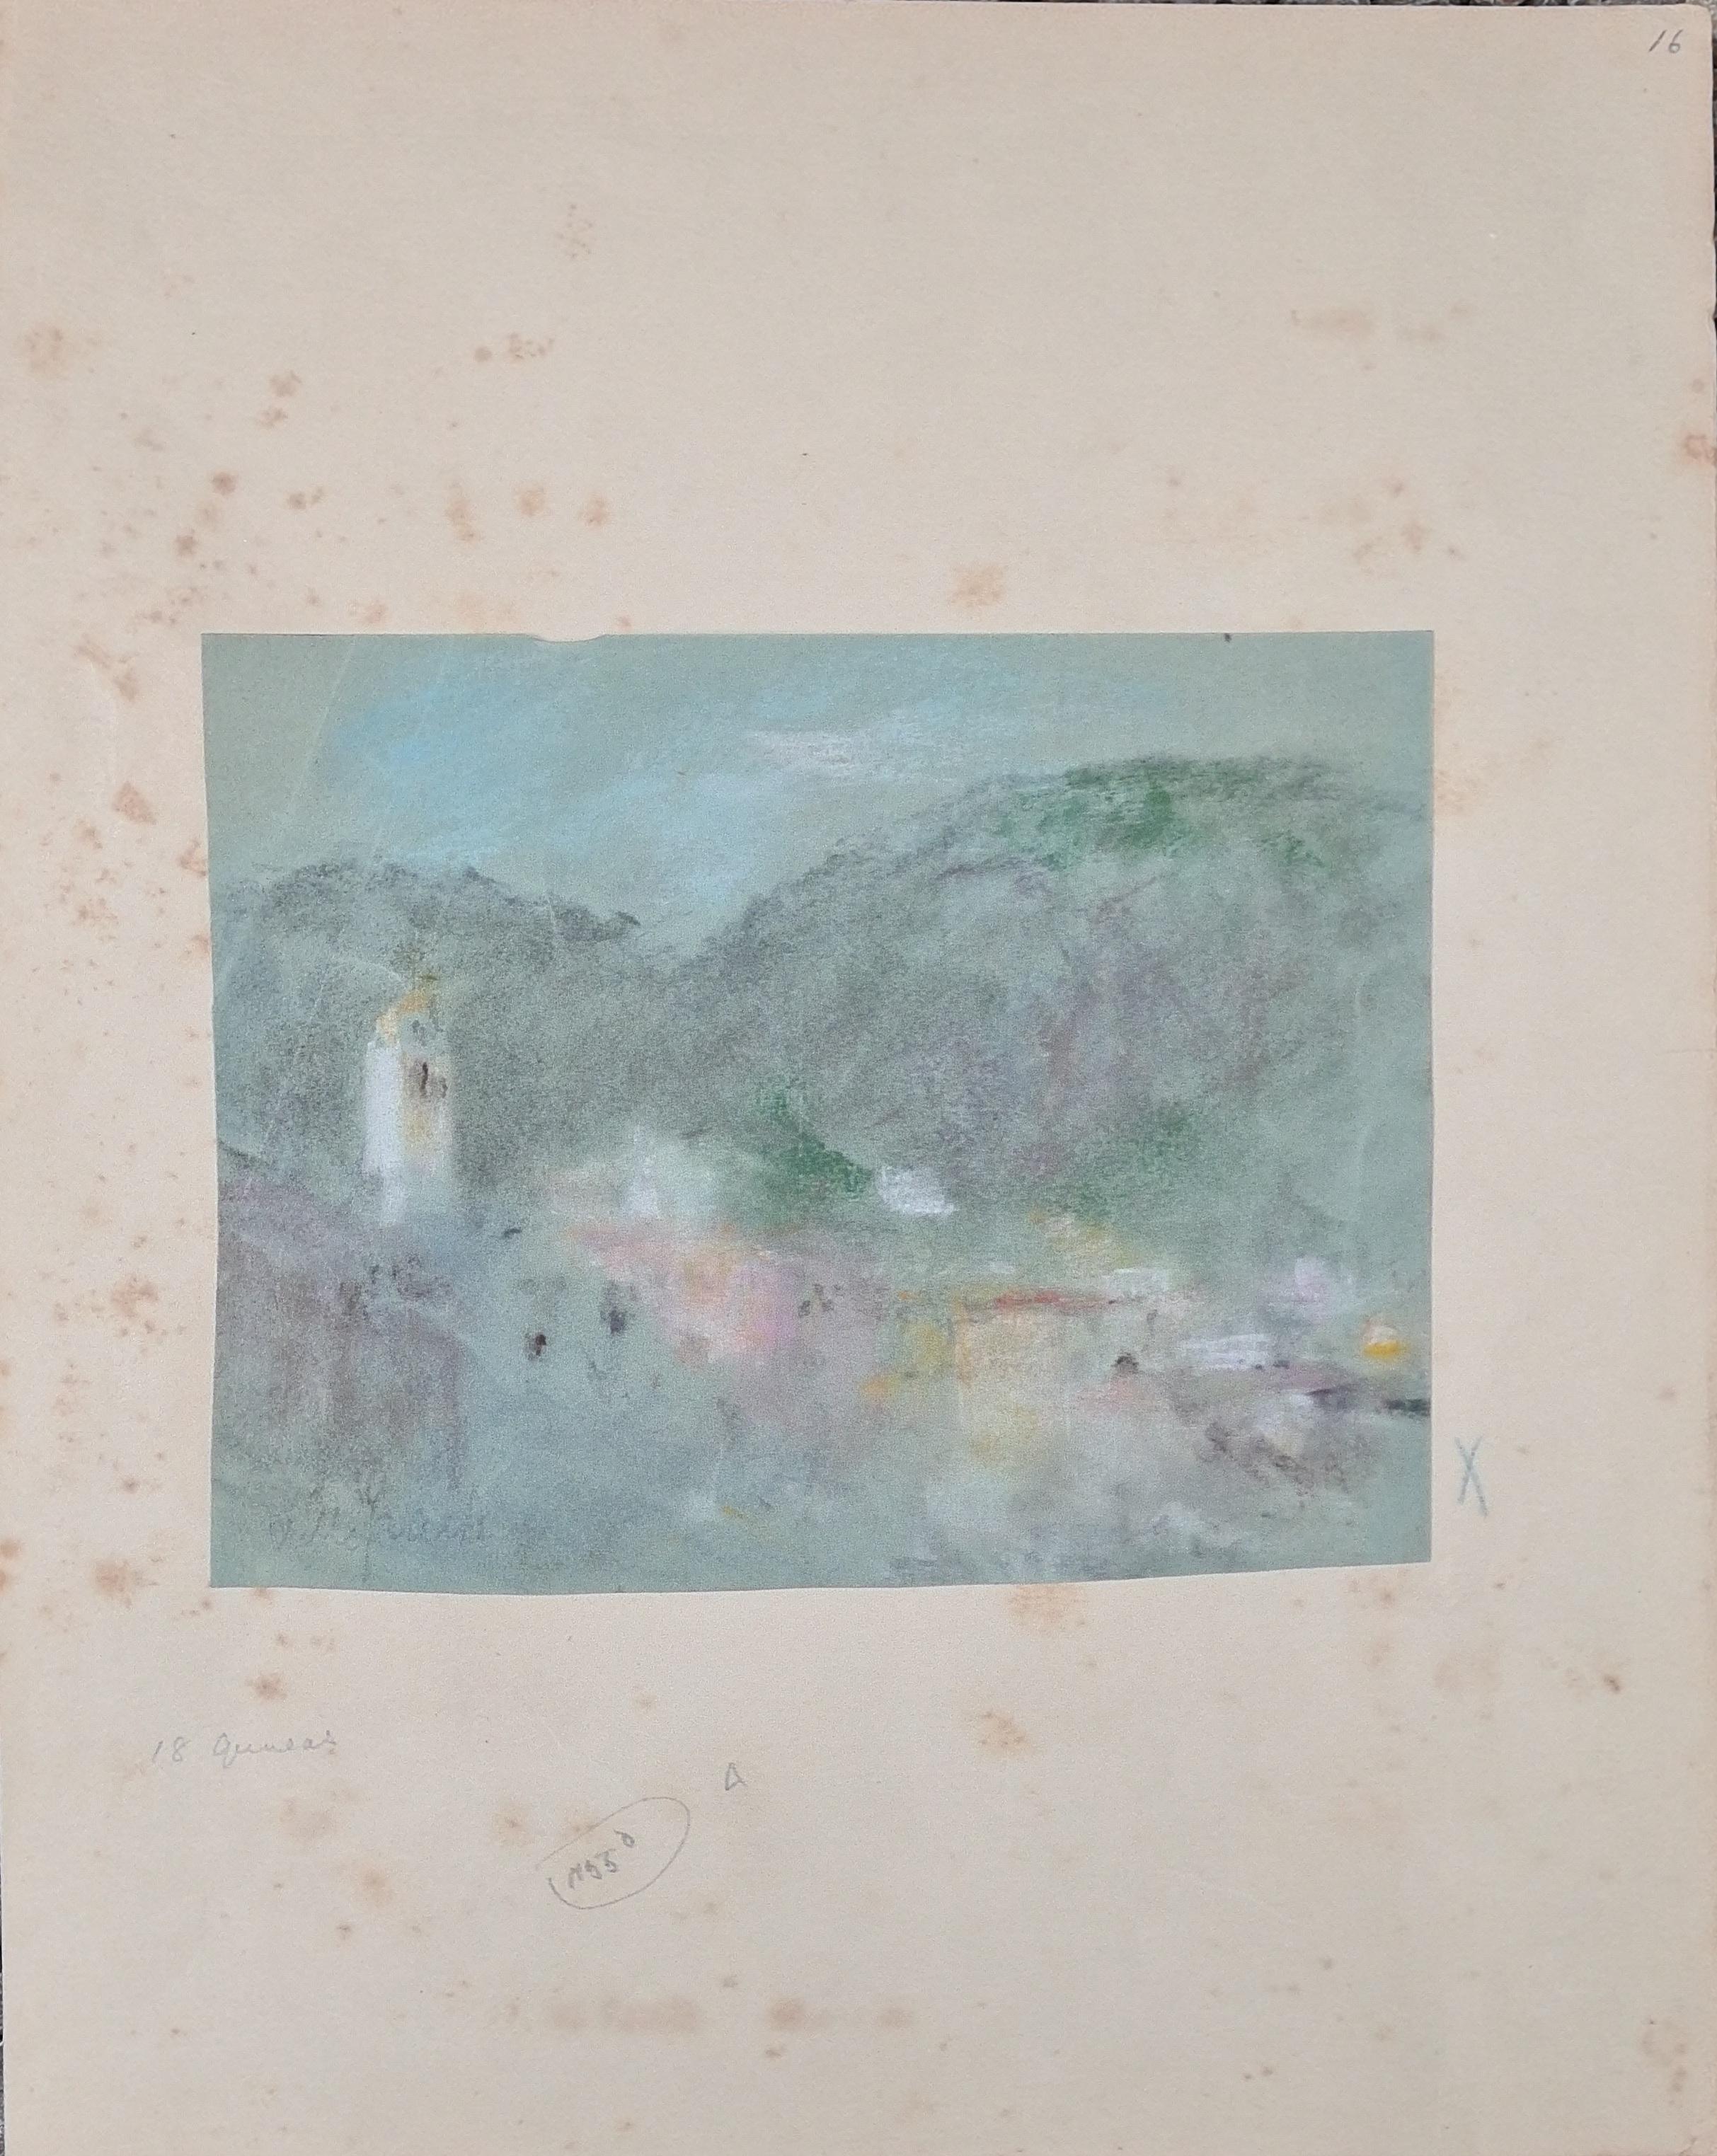 19th century Impressionist view, in pastel, chalk and crayon, in the style of Turner, of Villefranche, South of France by British artist Hercules Brabazon Brabazon. The work is titled and initial signed (HBB) by the artist. 

A very evocative work,